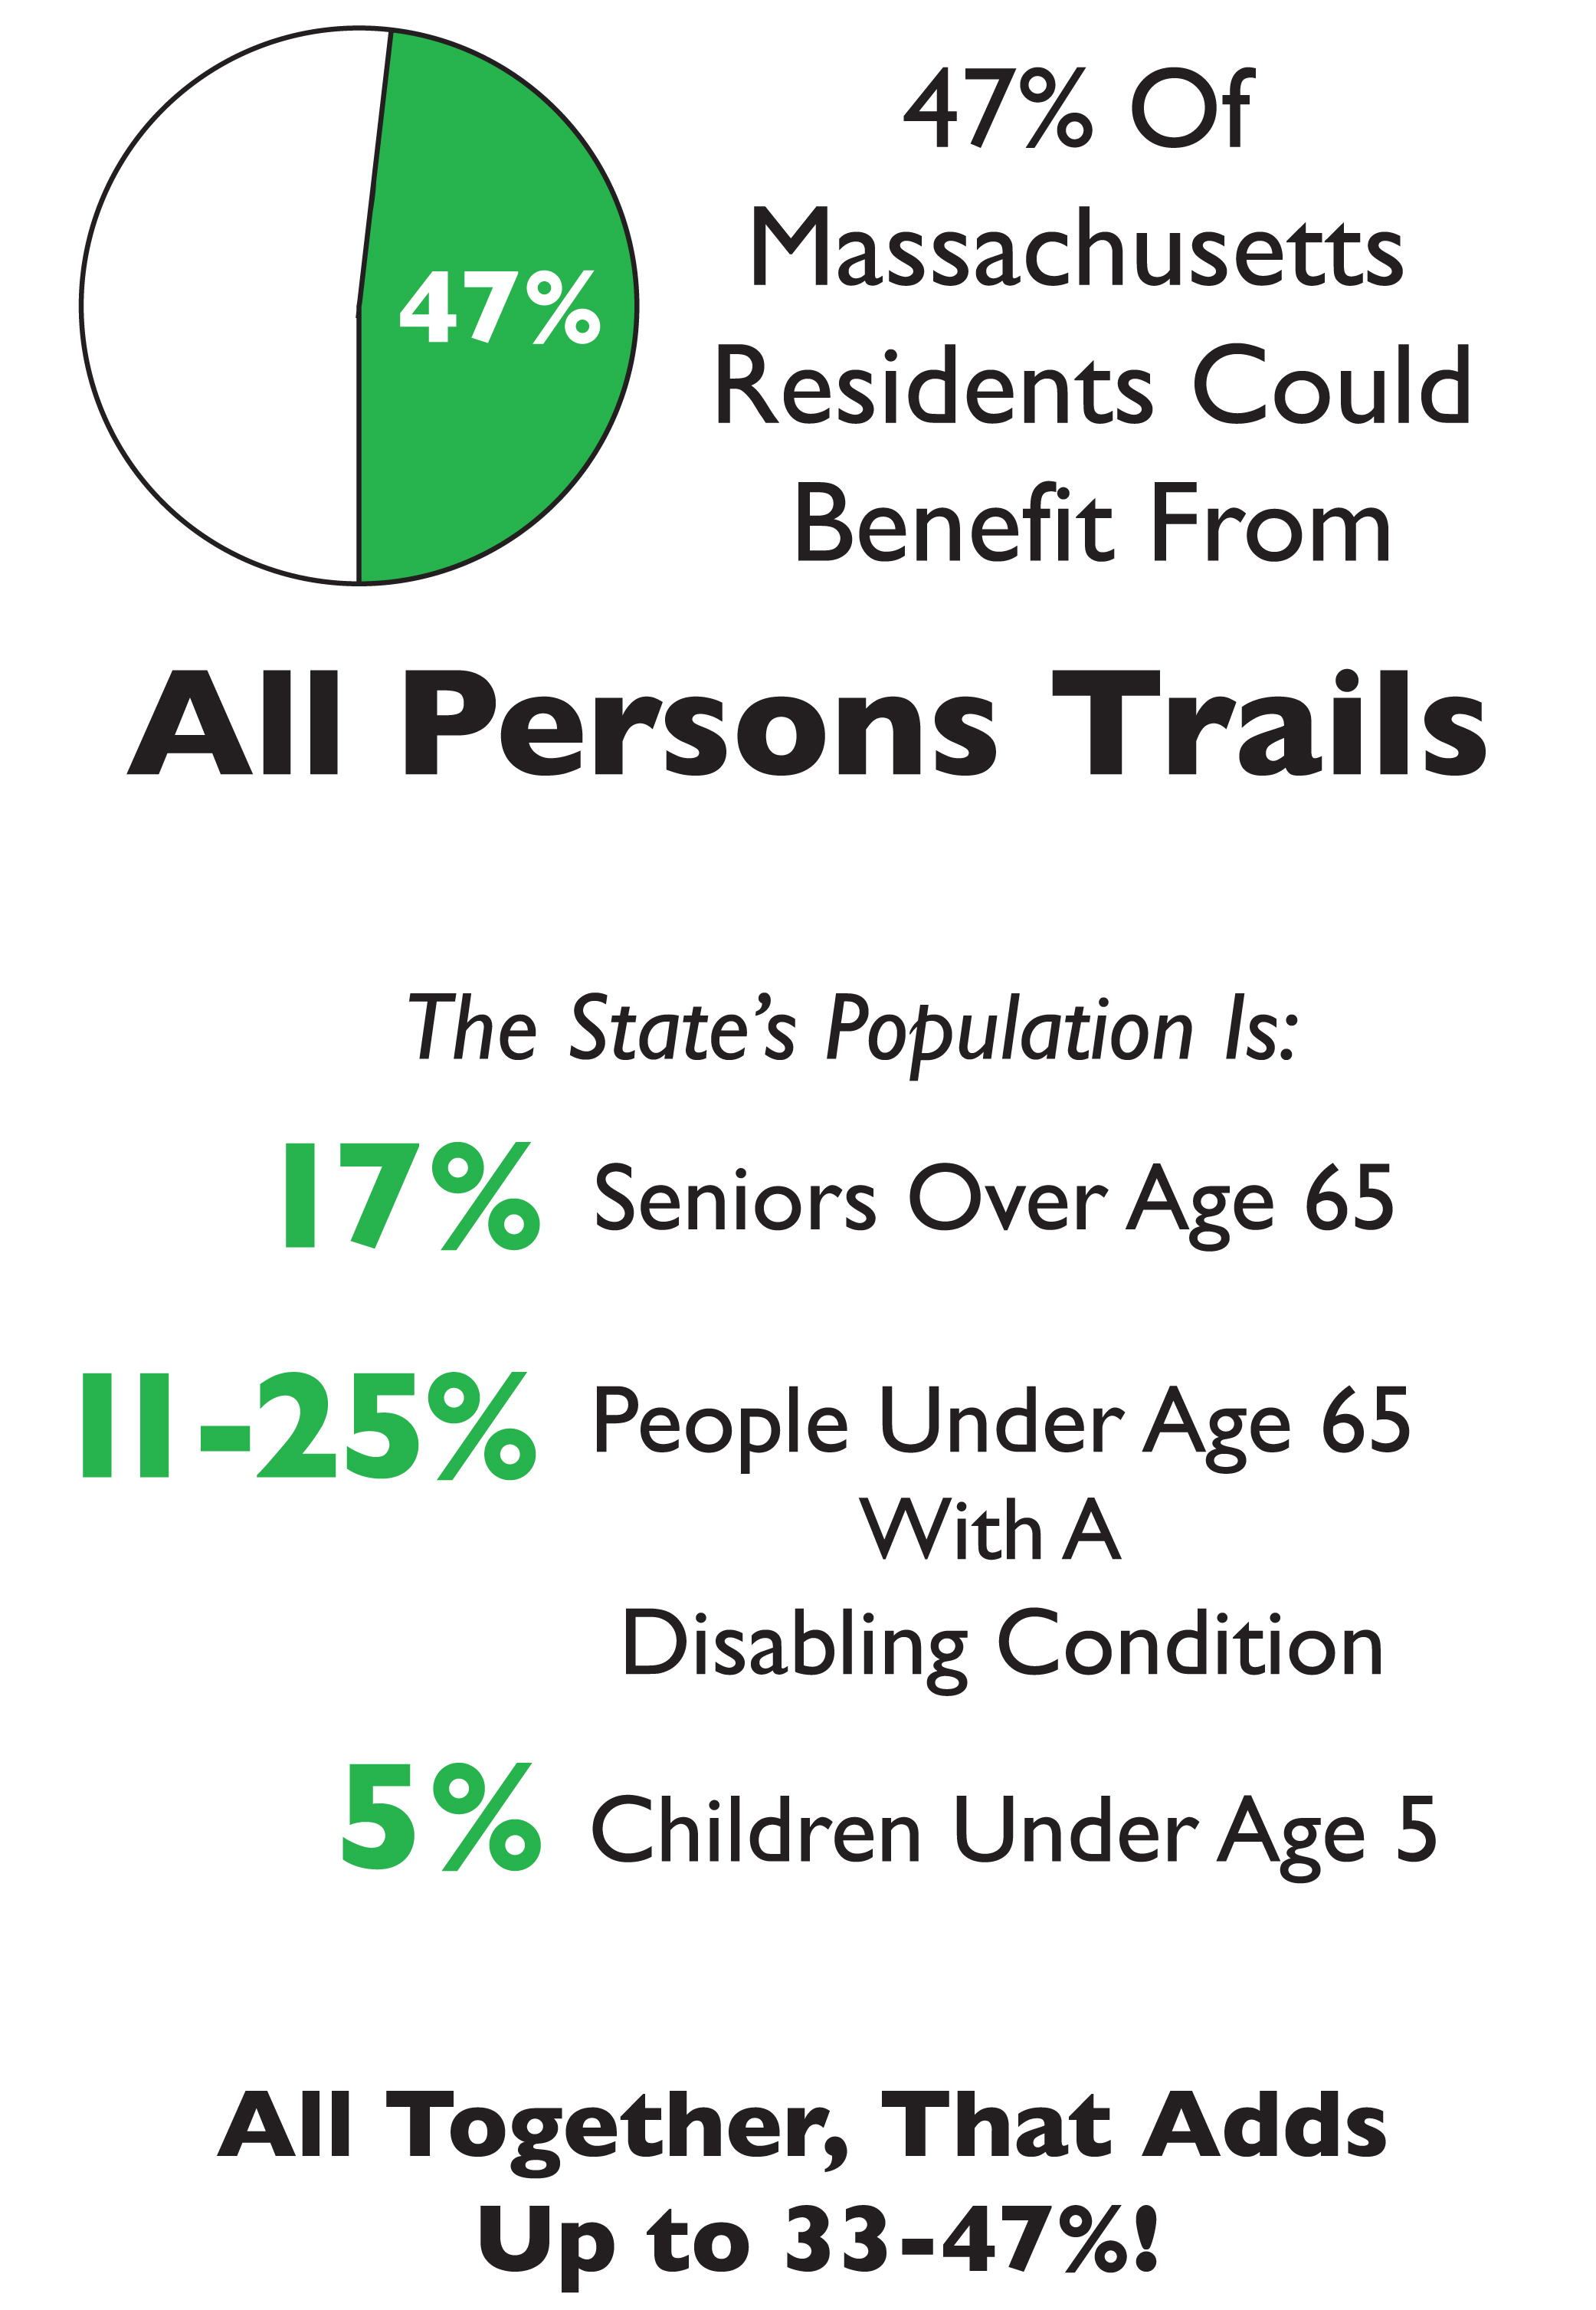 Graphic showing the population percentages. There is a pie chart that says 47% of the Massachusetts population can benefit from All persons trails. Below are the category percentages: 17% seniors, 11-25% uder age 65 with disabling conditions, 5% children under age 5.